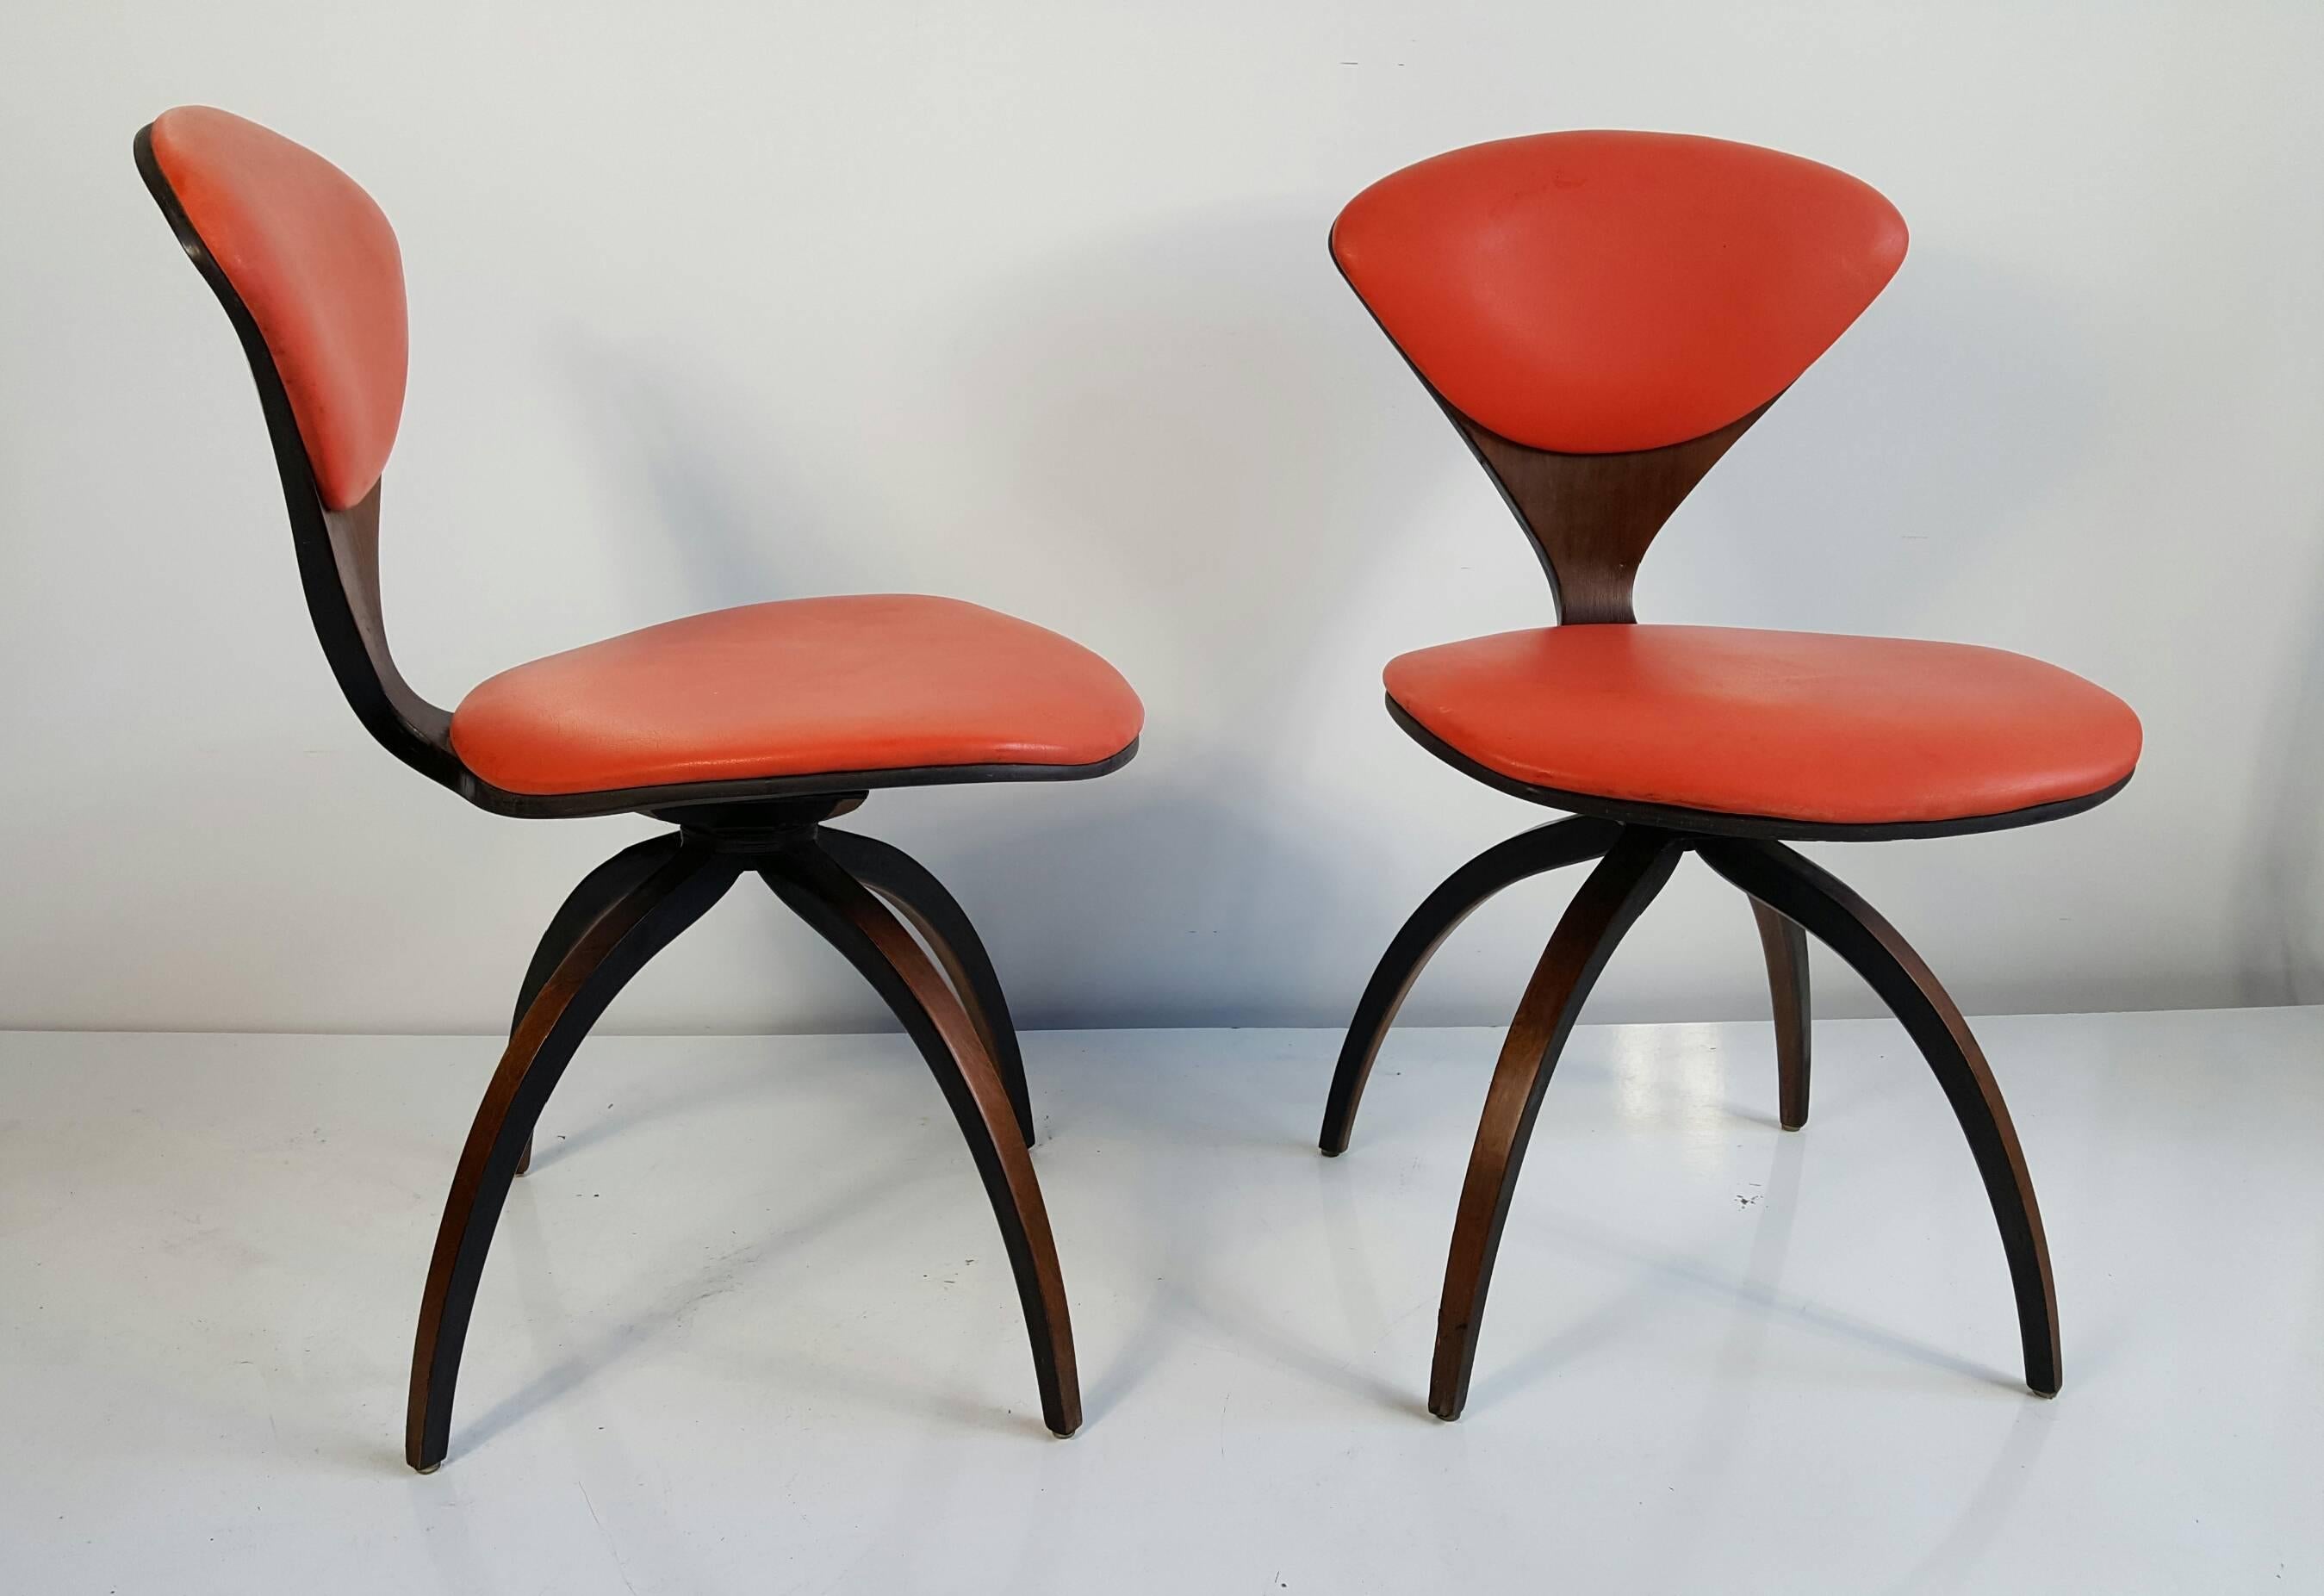 Pair of Norman Cherner swivel chairs for Plycraft, American, circa 1959. Natural walnut frames, original orange naugahyde seat and back upholstery, excellent original condition.